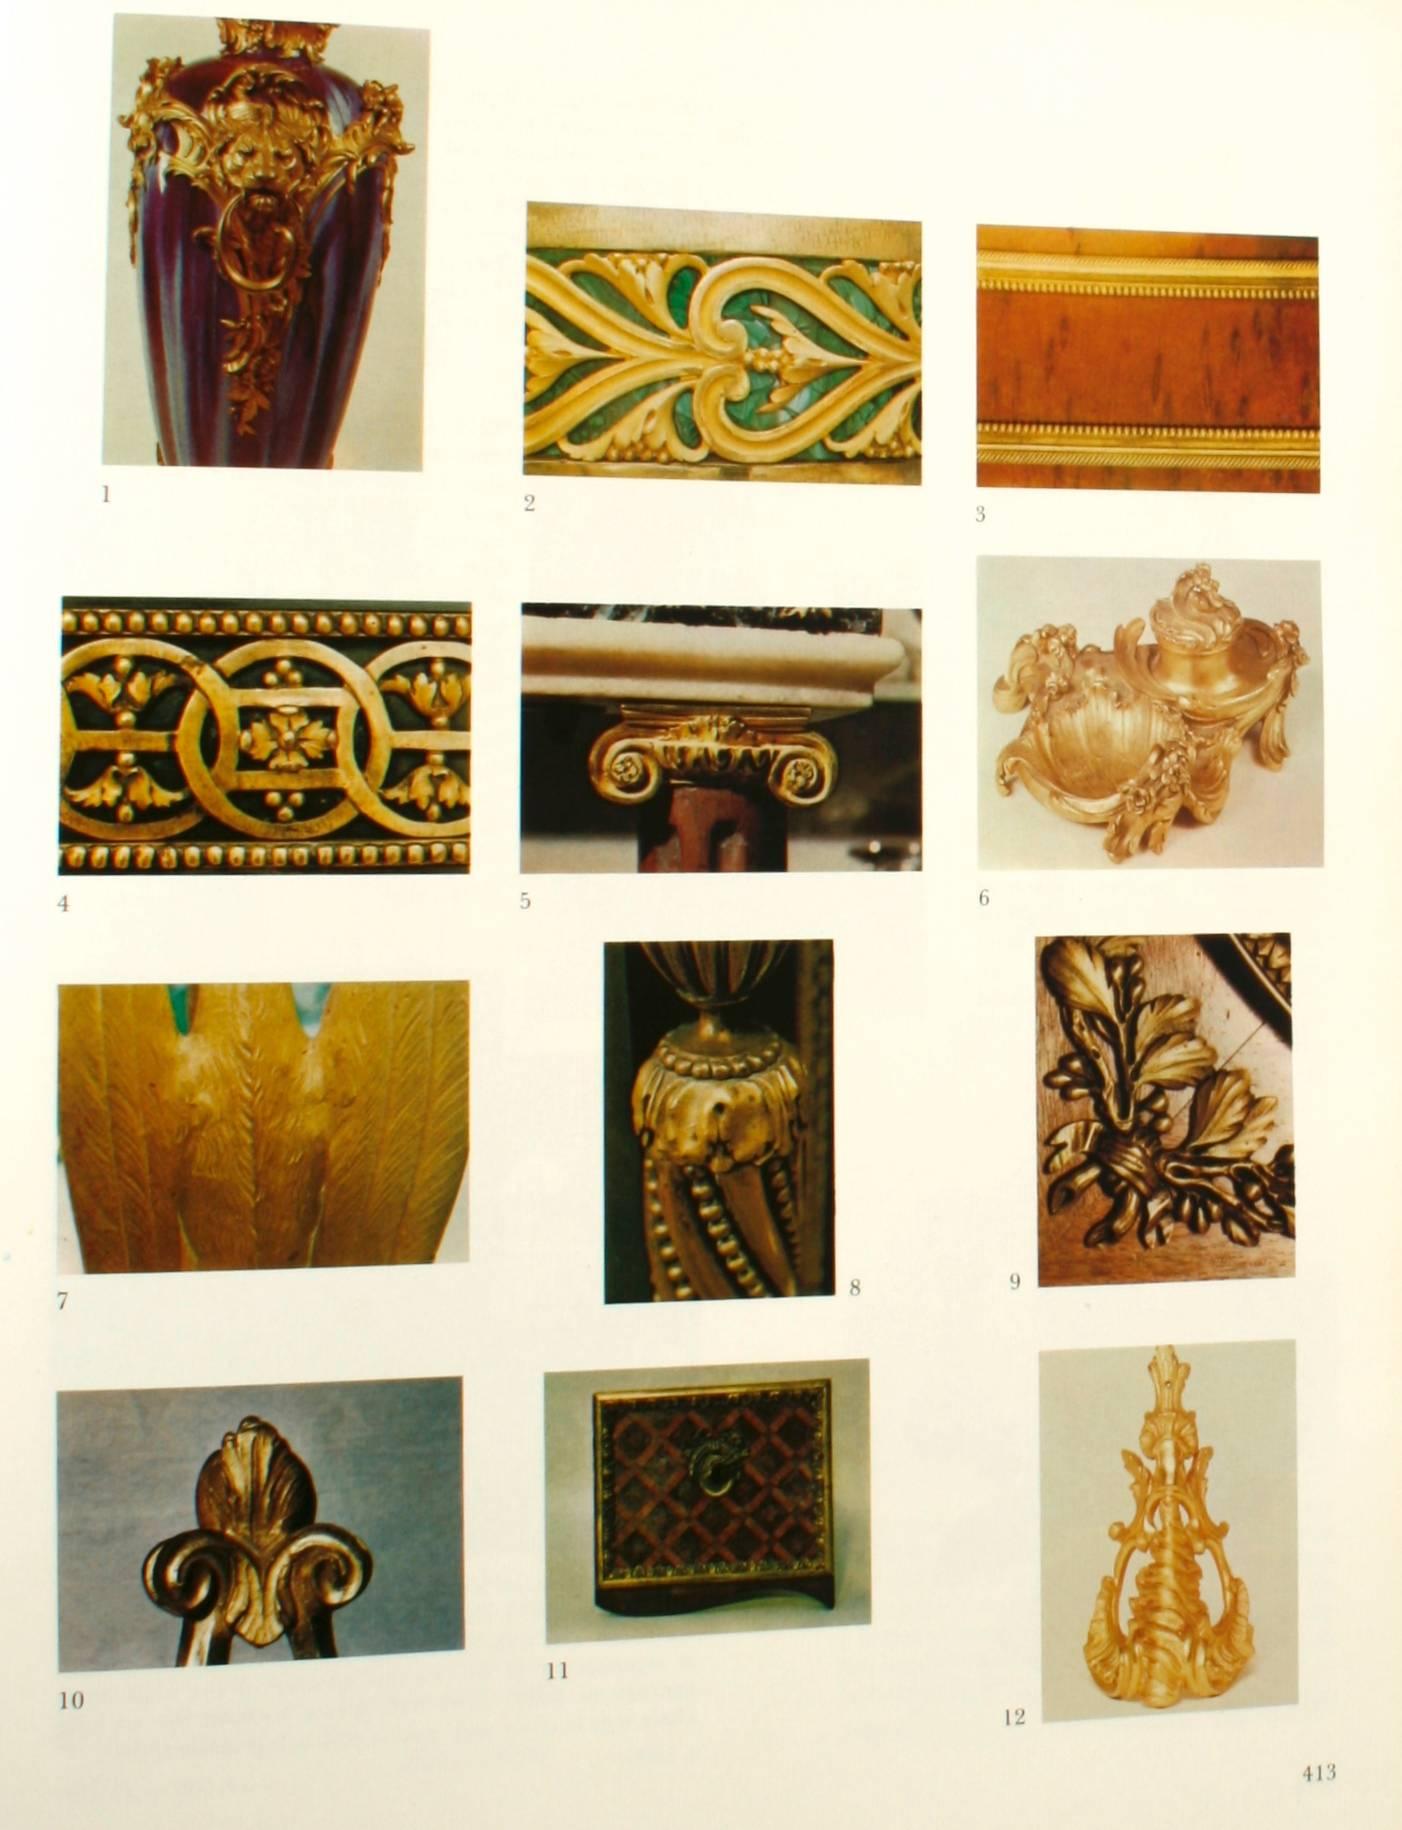 English Price Guide to 19th Century European Furniture, First Edition